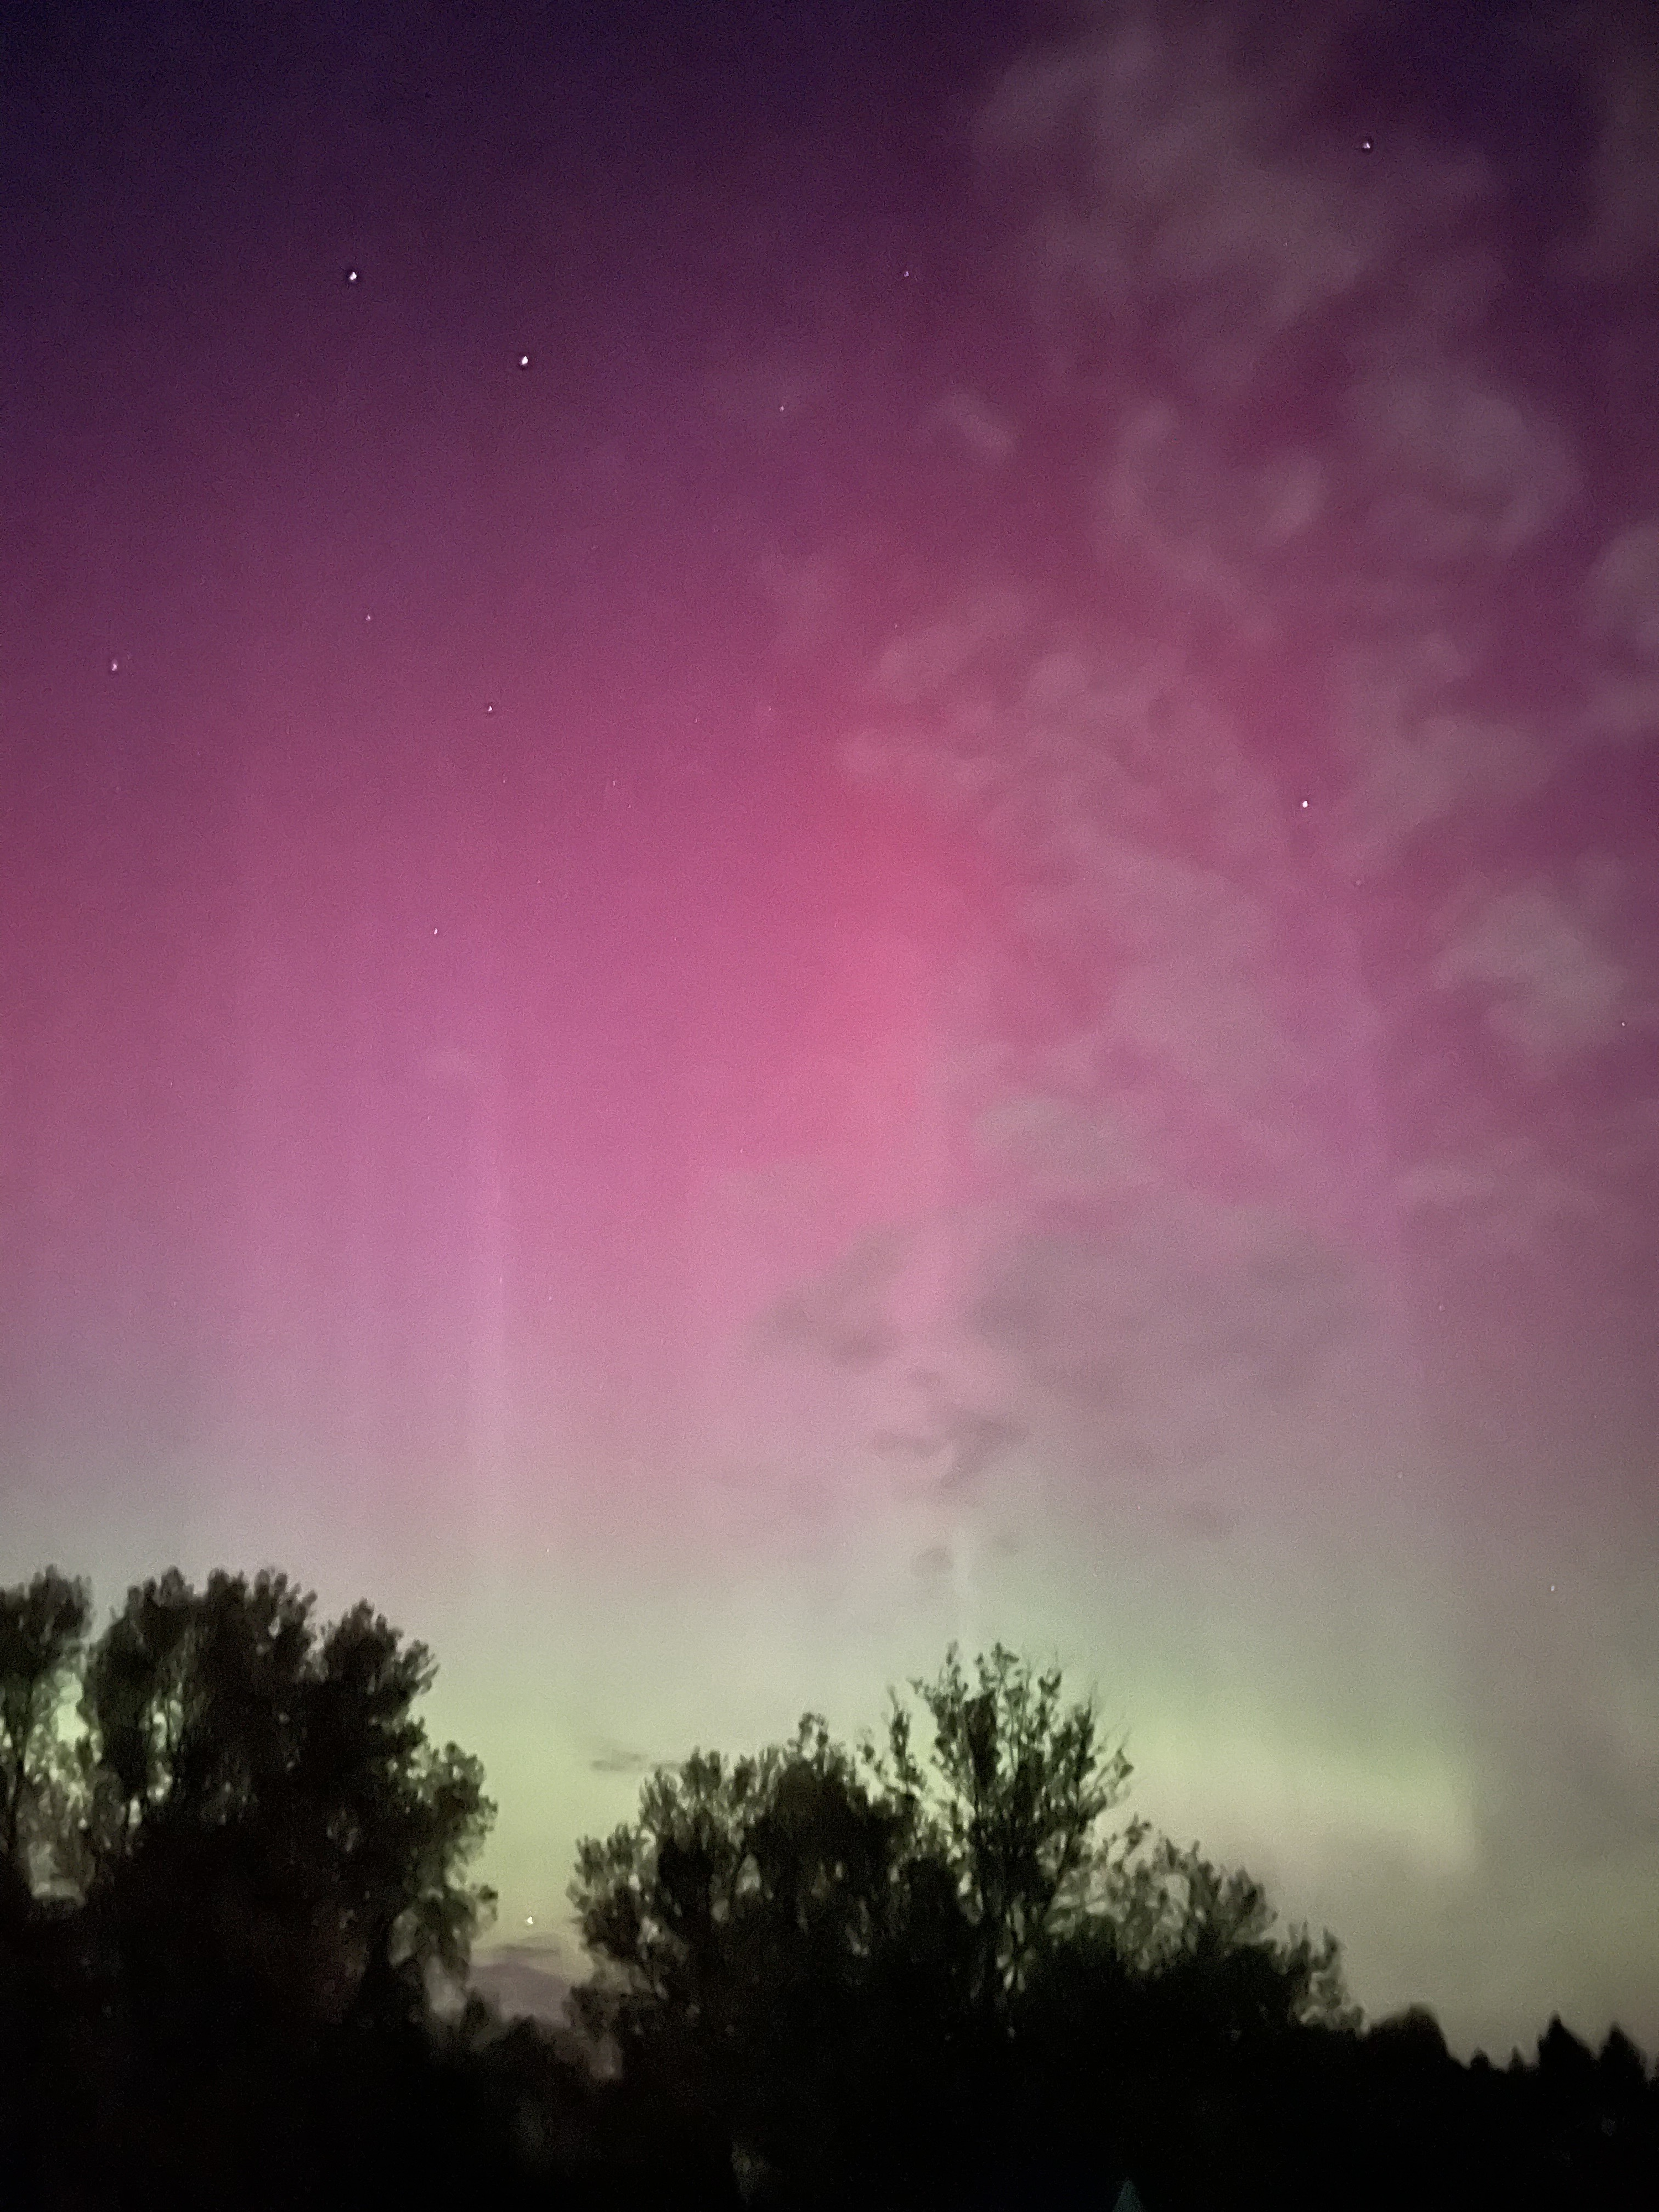 Metro Detroiters could 'catch a break' for a third straight night and see Northern Lights again Sunday